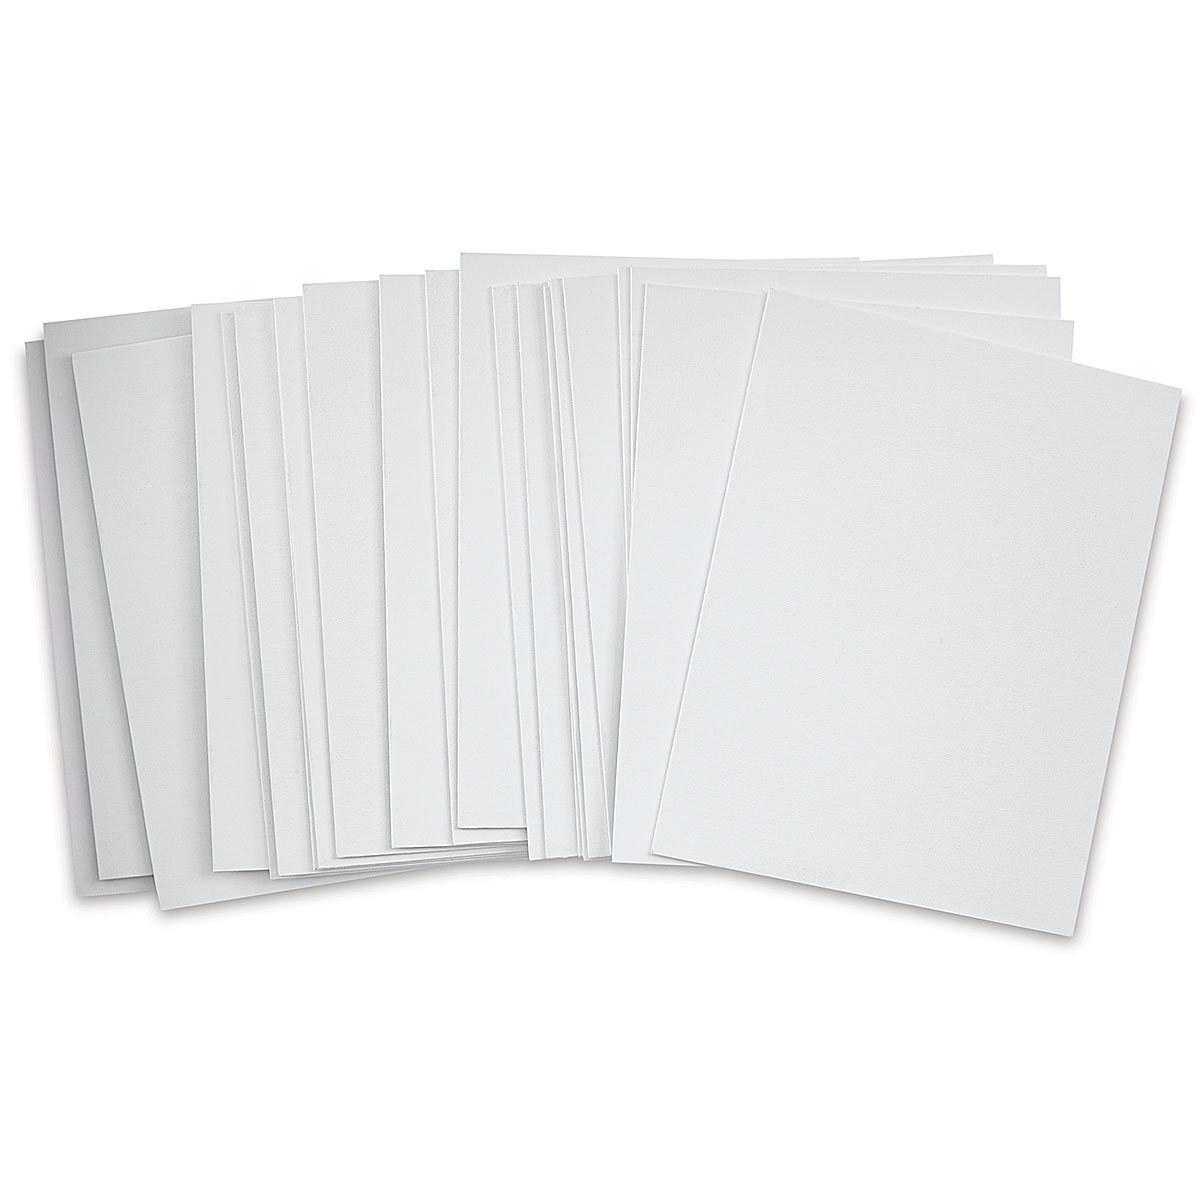 Sax Genuine Canvas Panel Classroom Pack, 14 x 18 Inches, White, Pack of 36